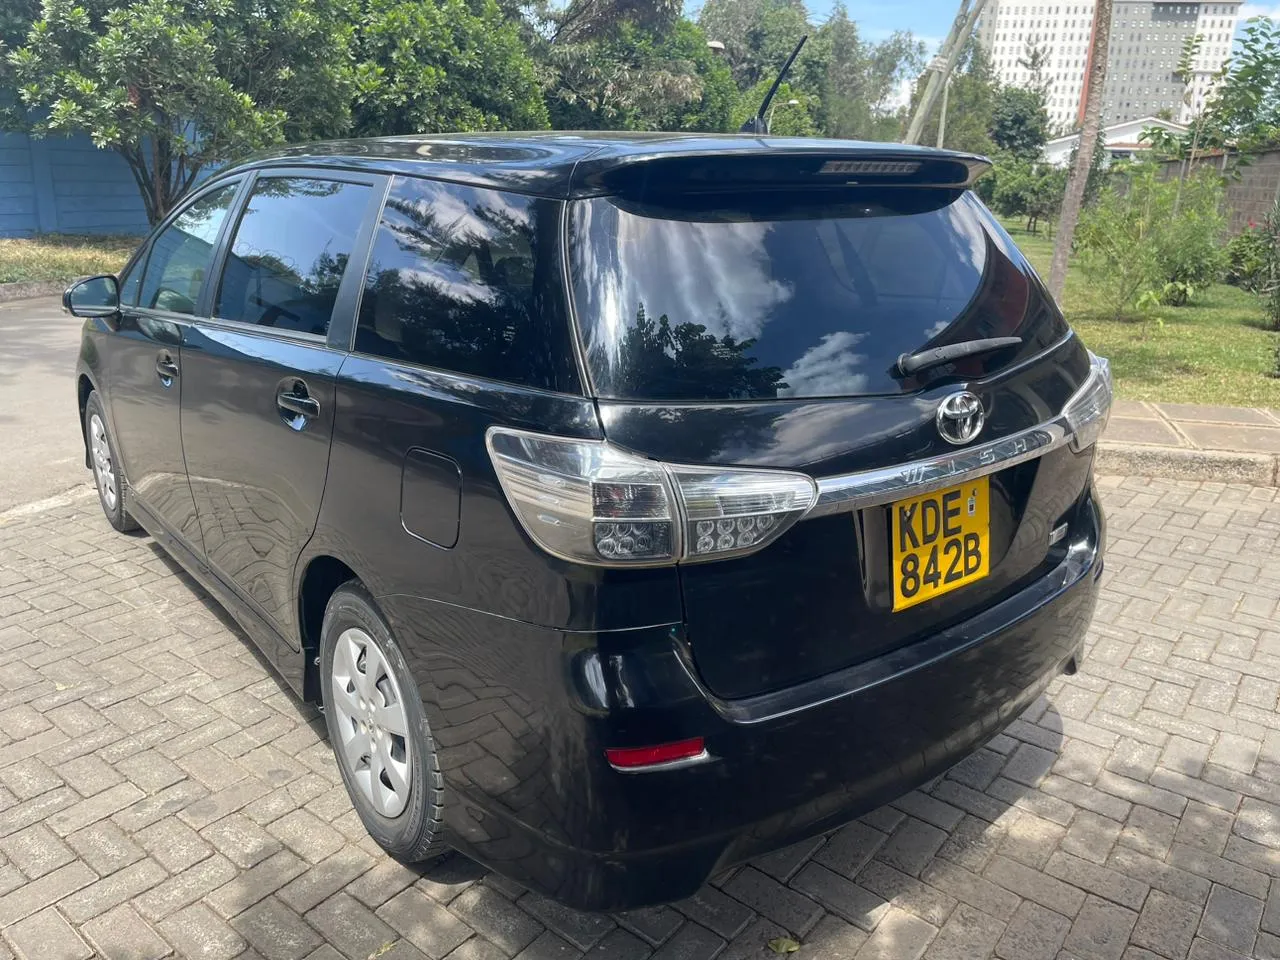 Toyota WISH for sale in Kenya You Pay 30% Deposit Trade in OK EXCLUSIVE